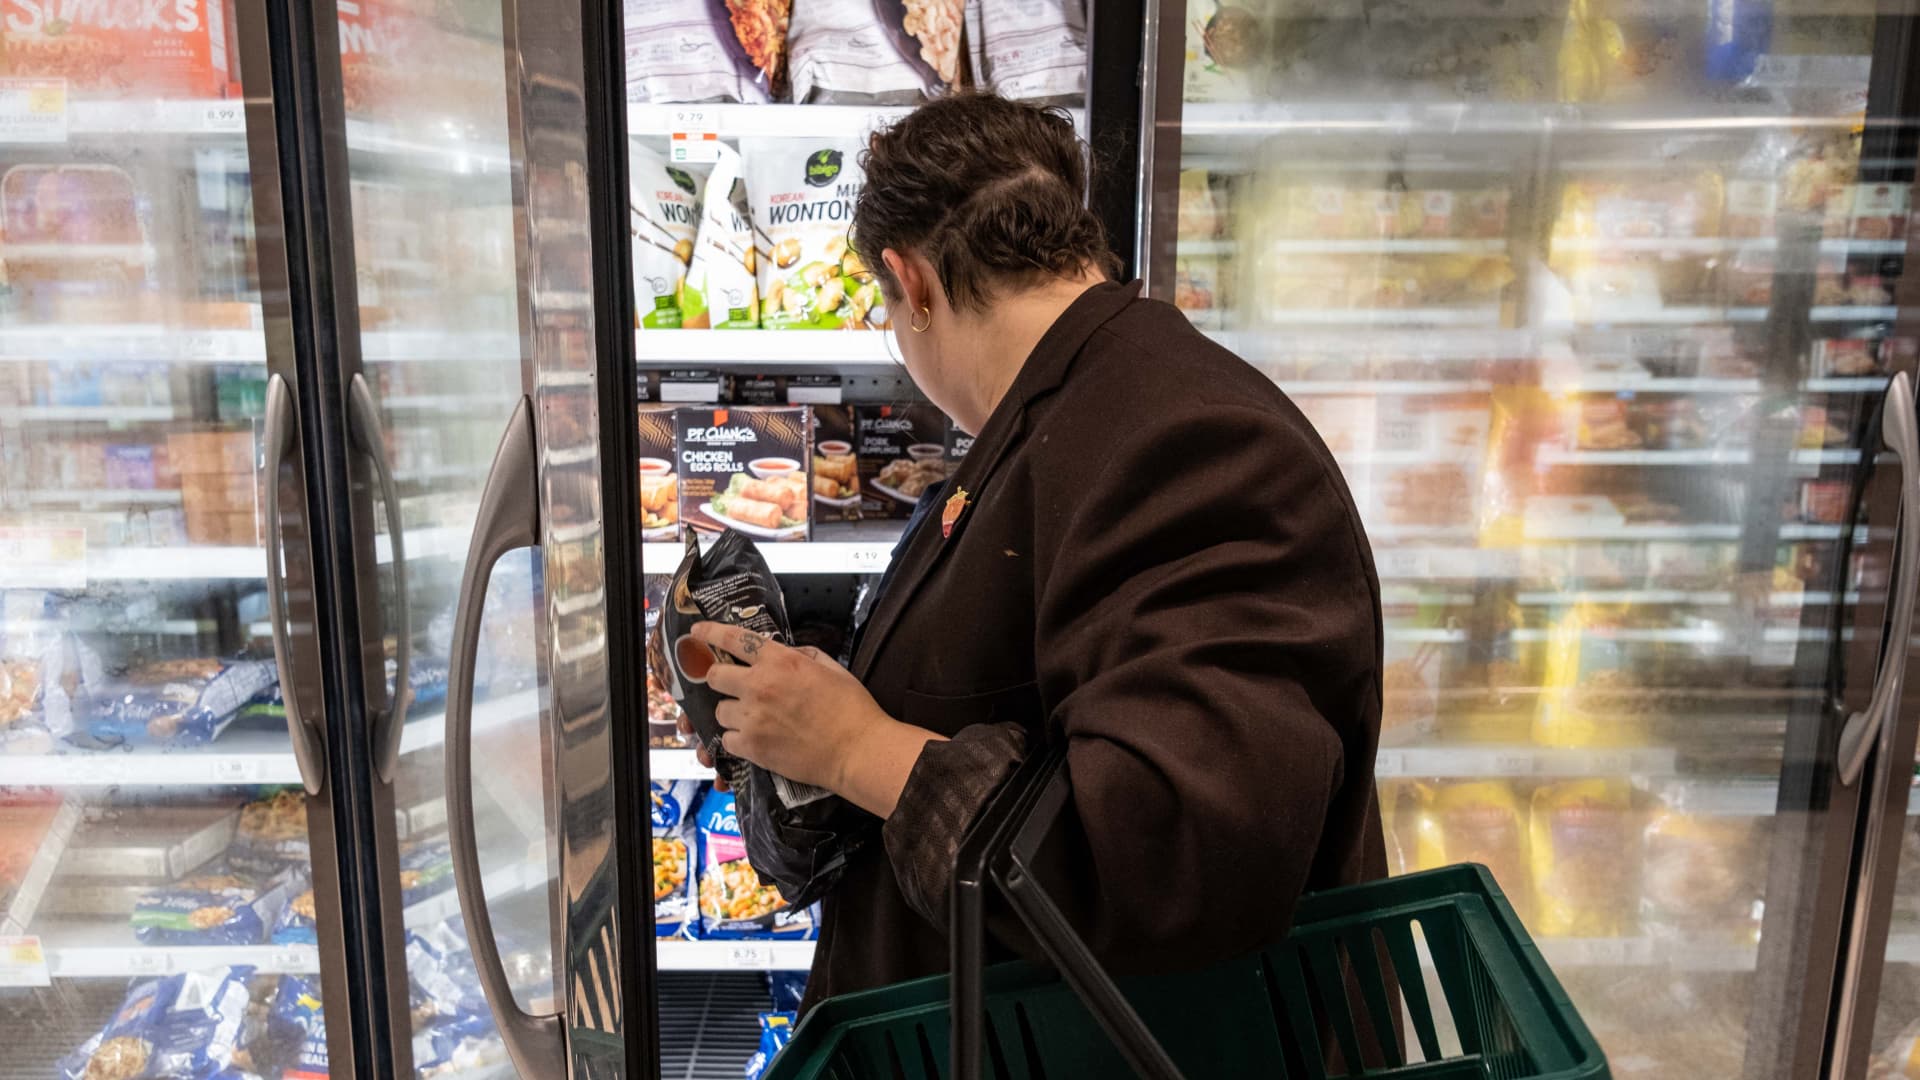 The New York Fed survey shows that consumers see inflation, spending, and cooling